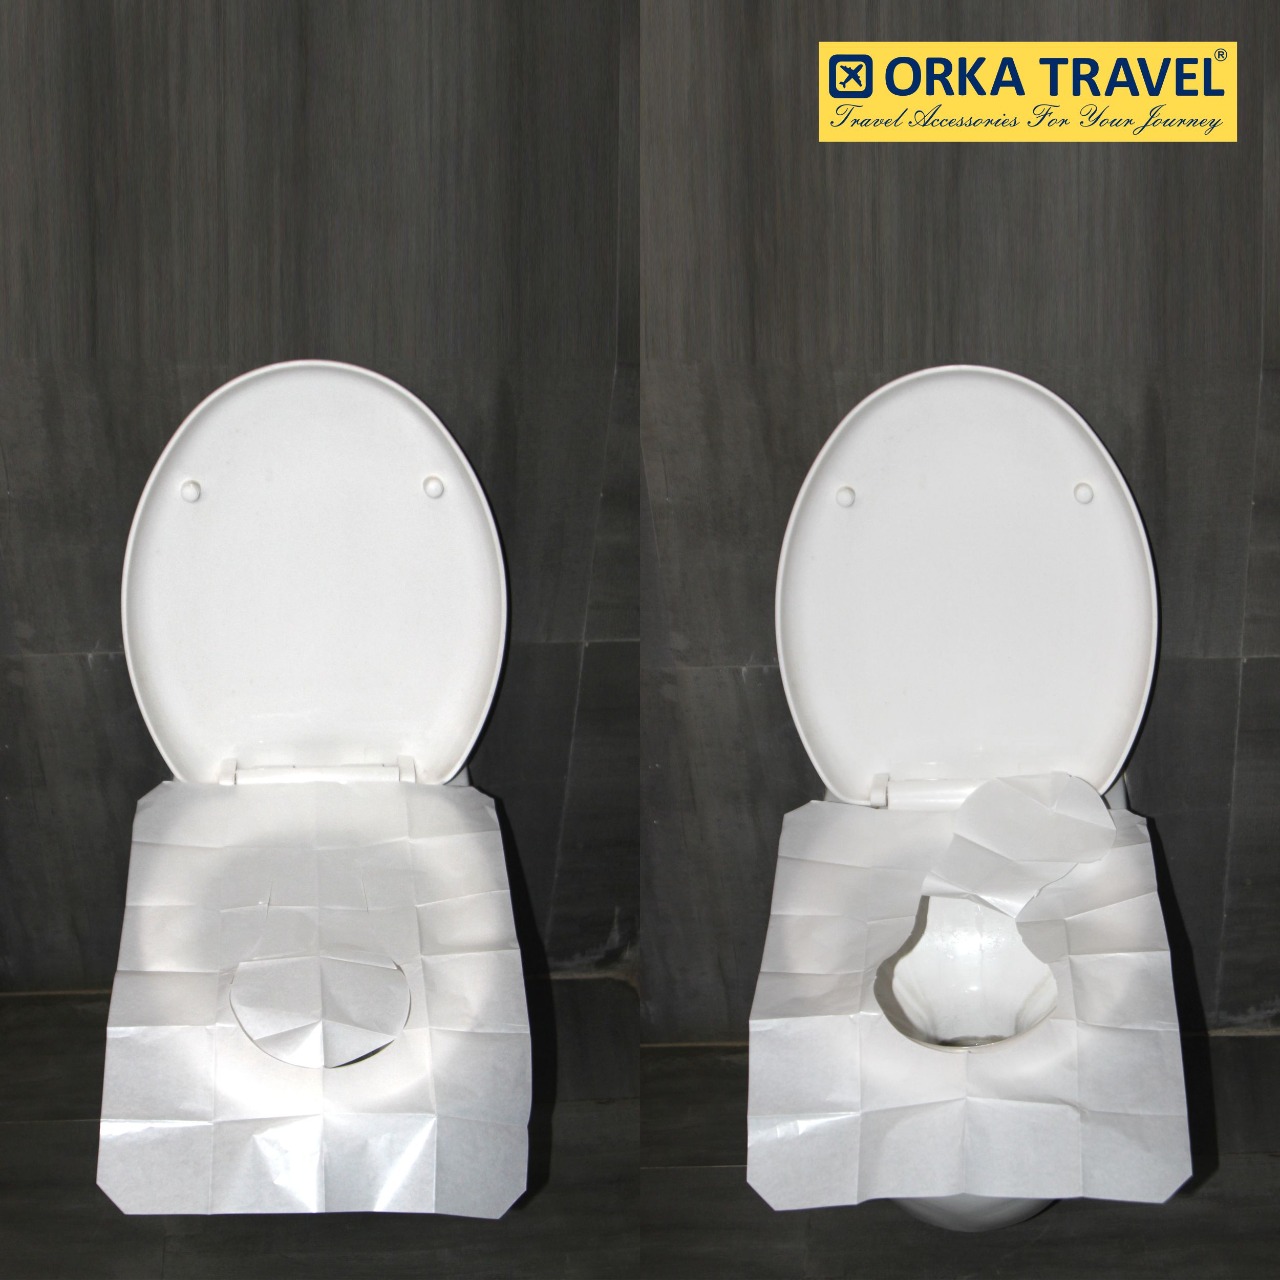 Orka Travel Toilet Seat Cover Disposable  